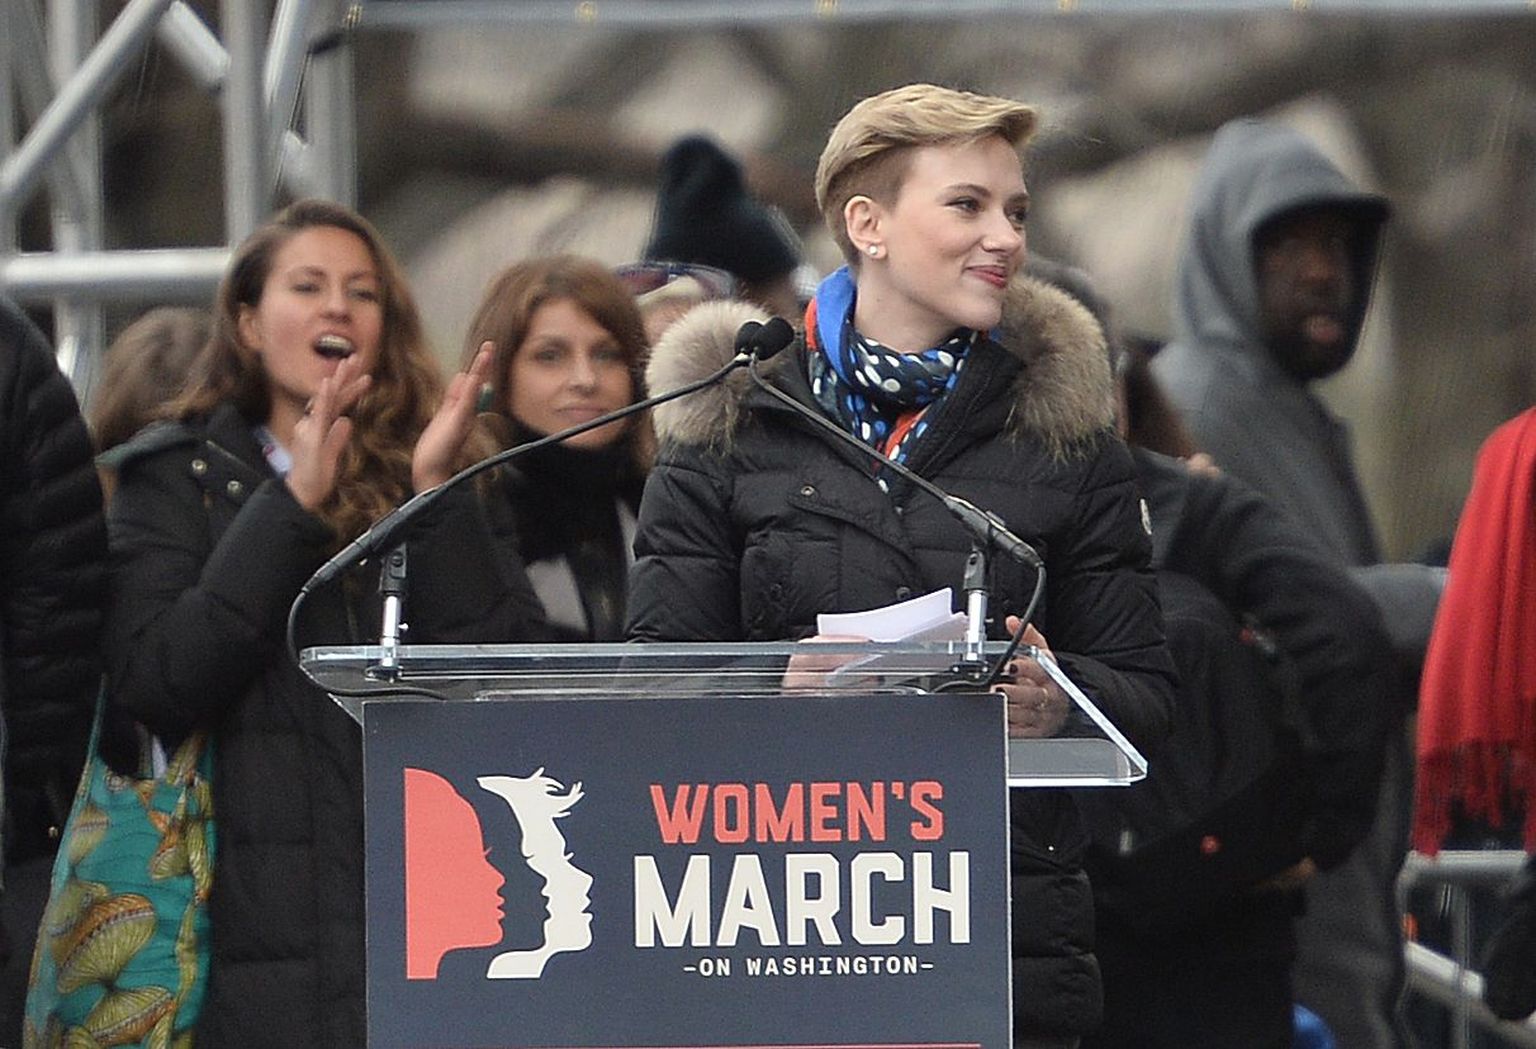 Actress Scarlett Johansson speaks during a protest on the National Mall in Washington, DC, for the Women's March on January 21, 2017.
Hundreds of thousands of protesters spearheaded by women's rights groups demonstrated across the US to send a defiant message to US President Donald Trump. / AFP PHOTO / Andrew CABALLERO-REYNOLDS